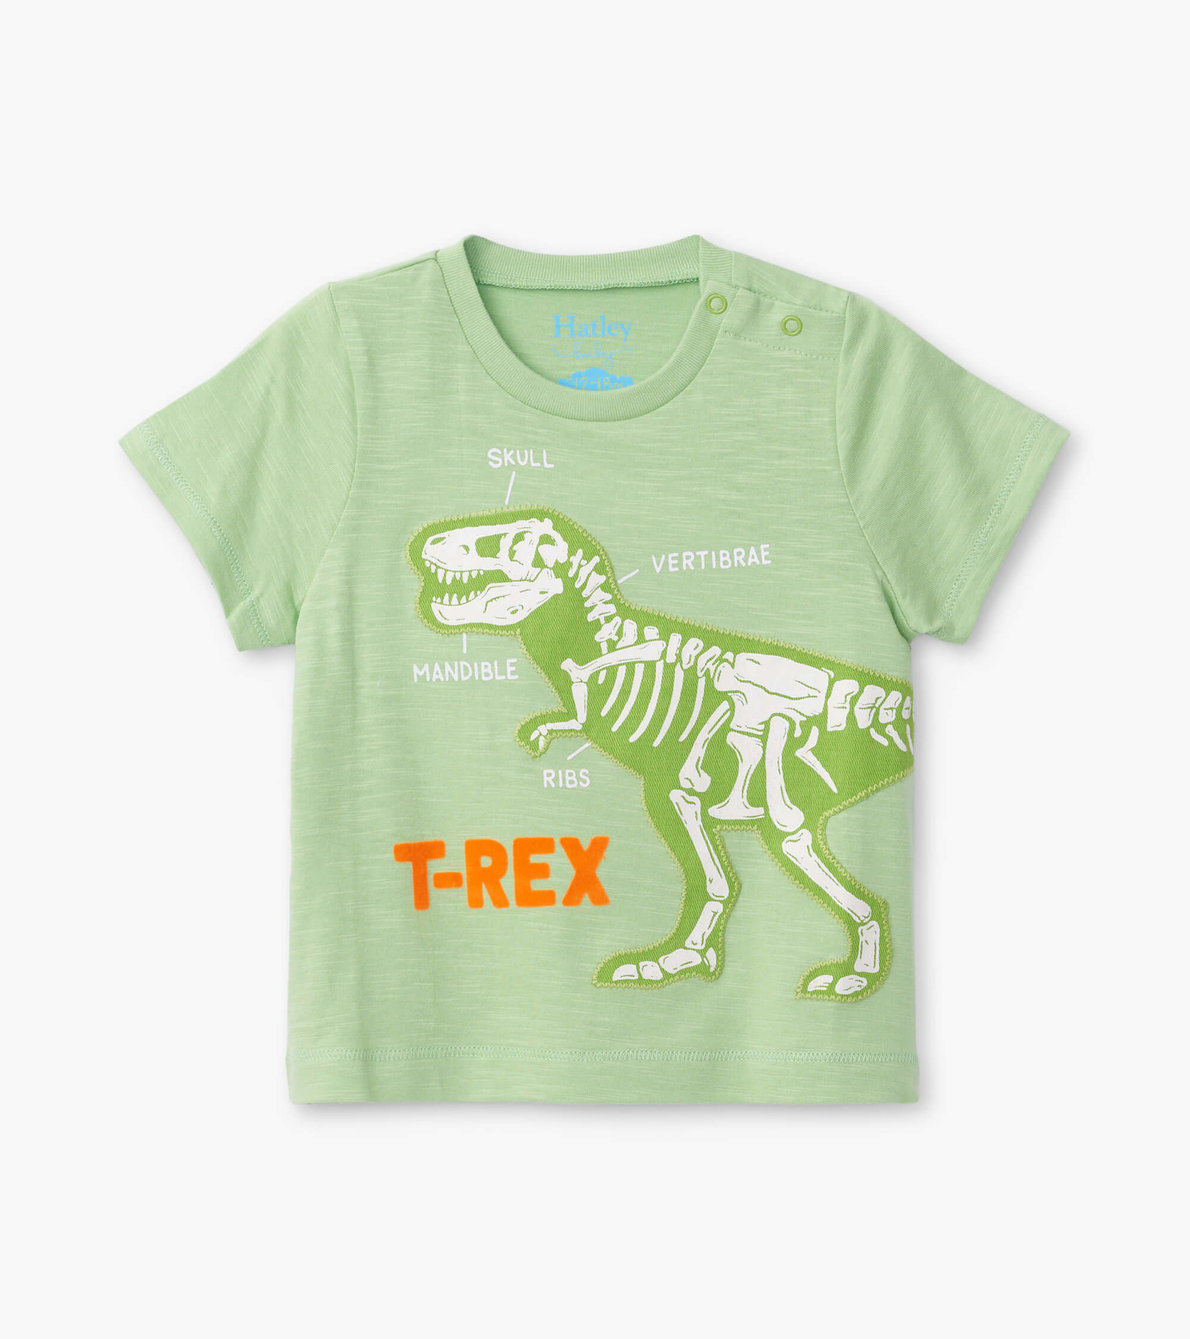 View larger image of T-Rex Anatomy Baby Graphic Tee